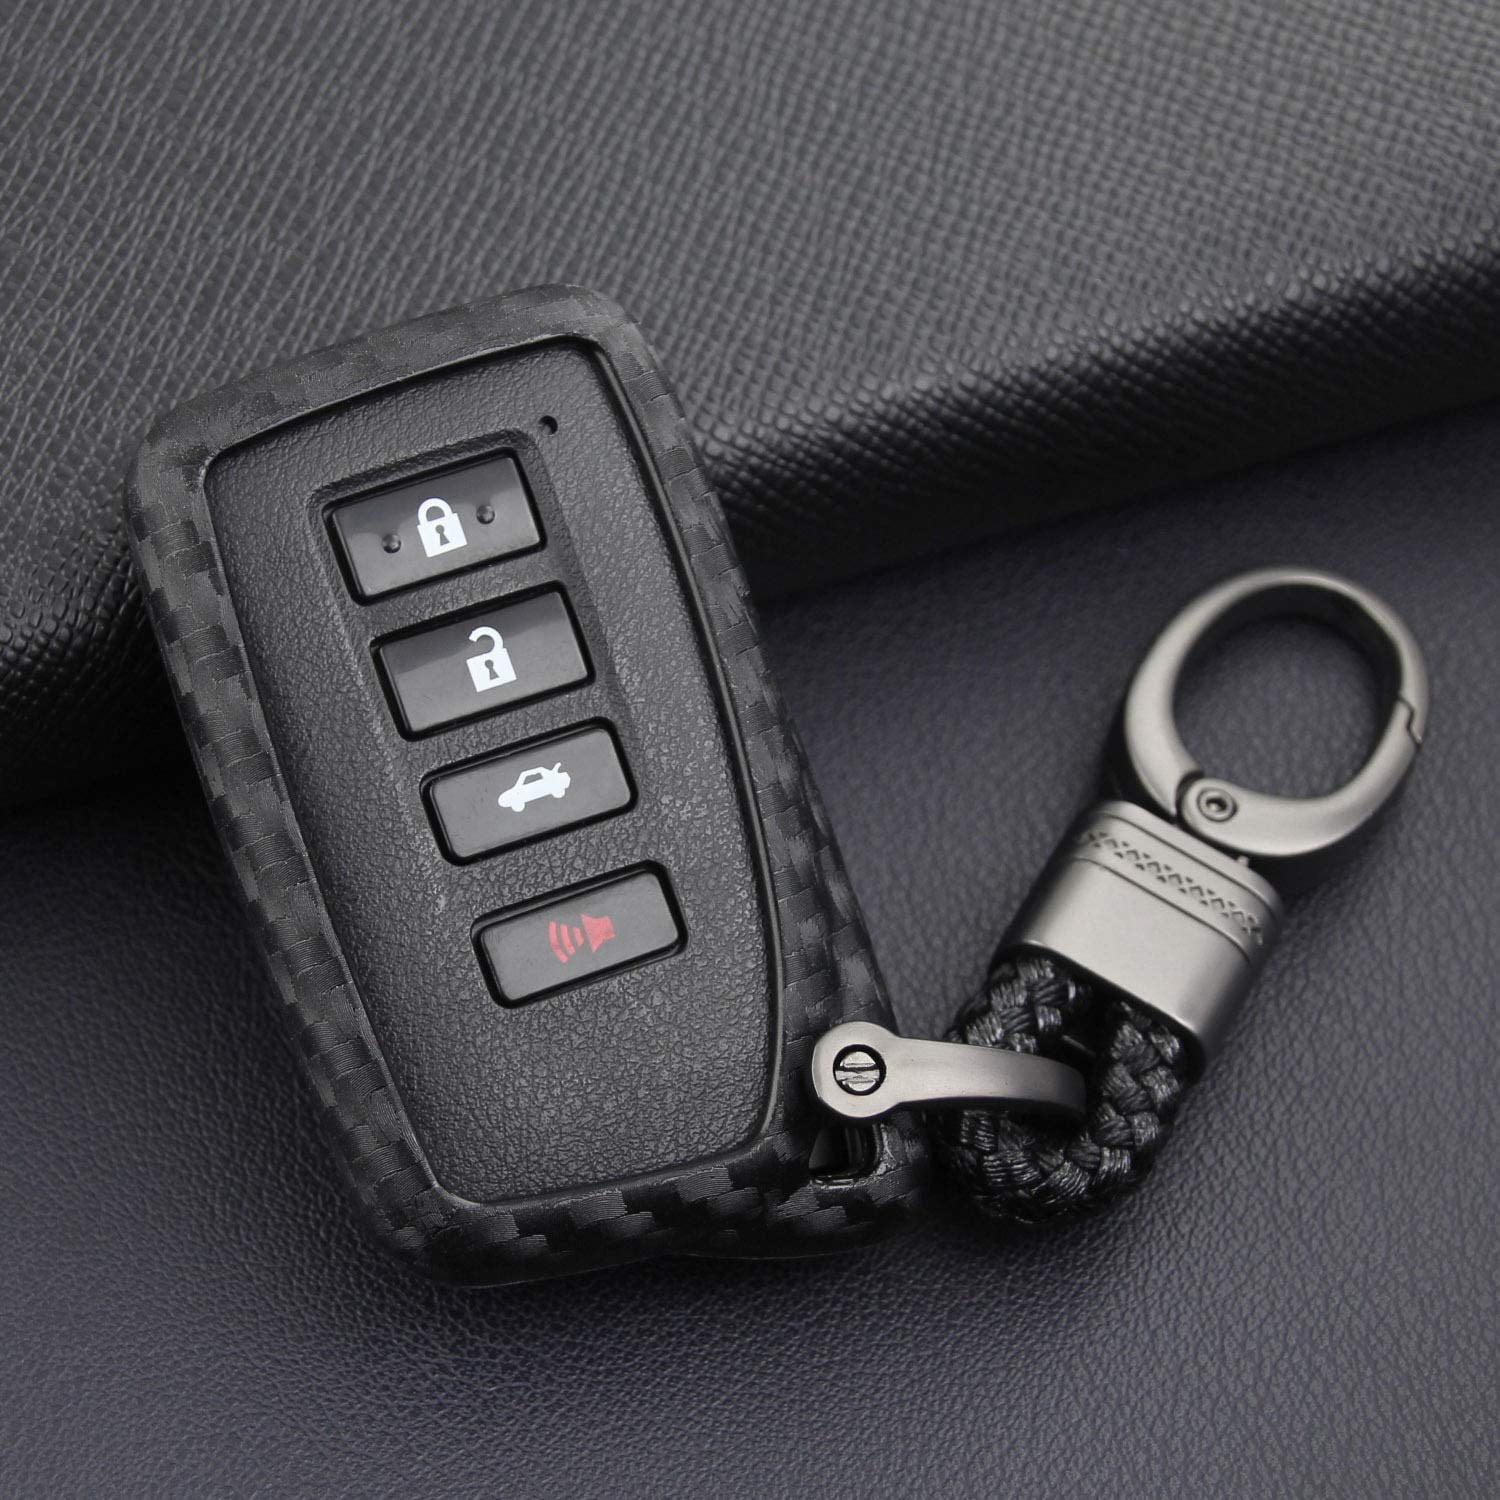 iJDMTOY Carbon Fiber Pattern Soft Silicone Key Fob Cover Case Compatible With Lexus IS ES GS RC NX RX LX 200 250 350 2nd Gen Smart Key